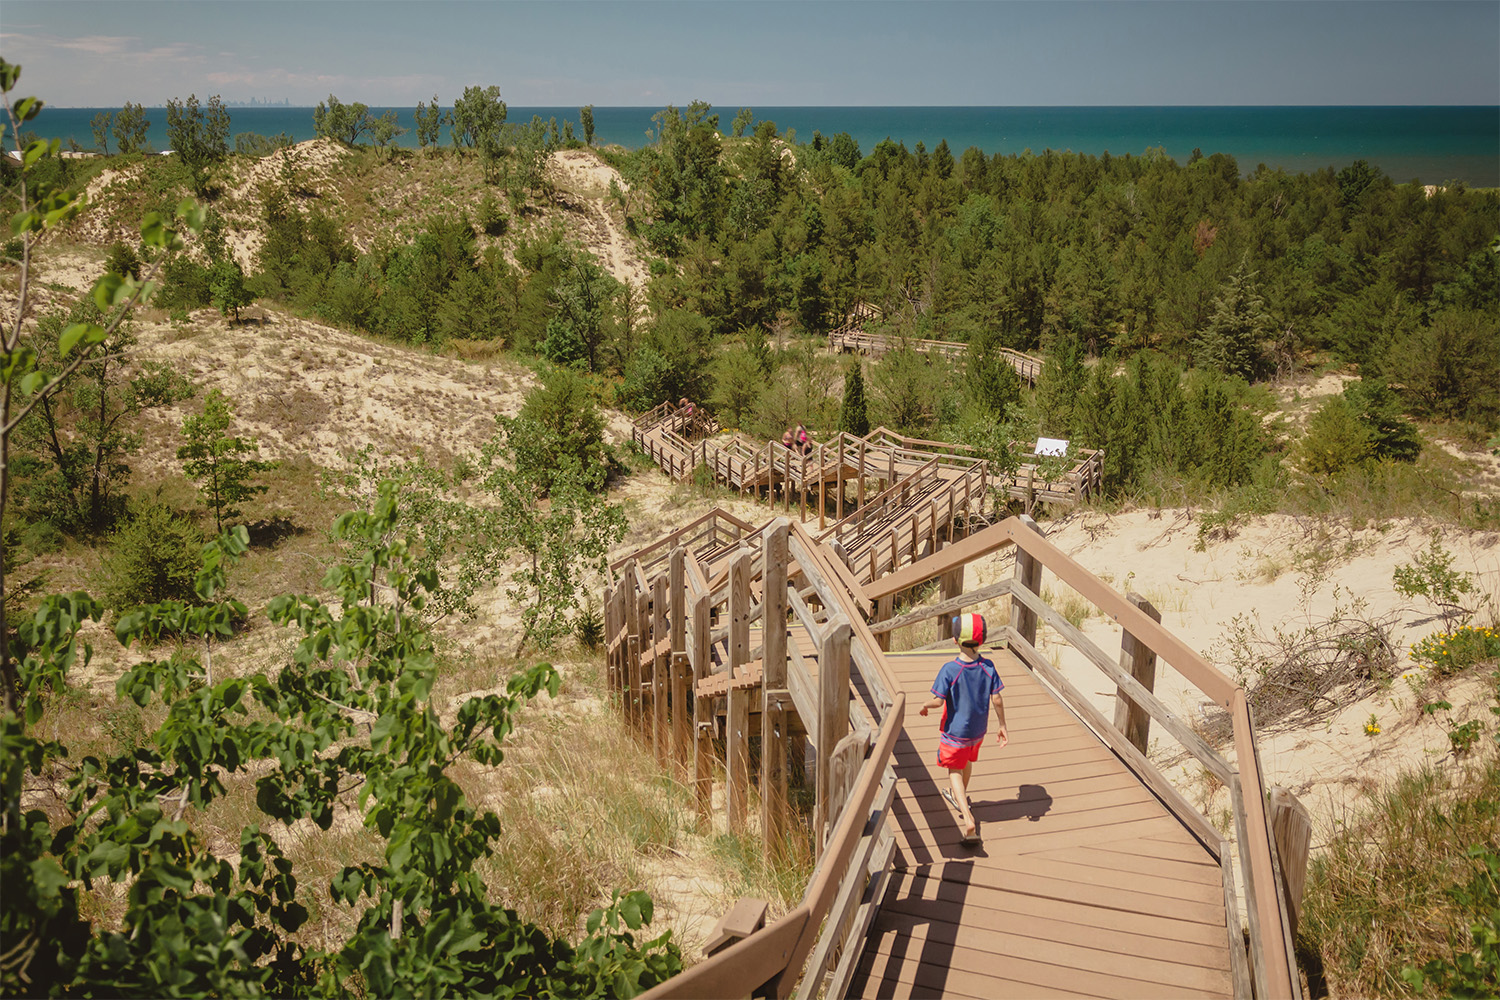 Boy hiking along dune succession trail in Indiana Dunes National Park.